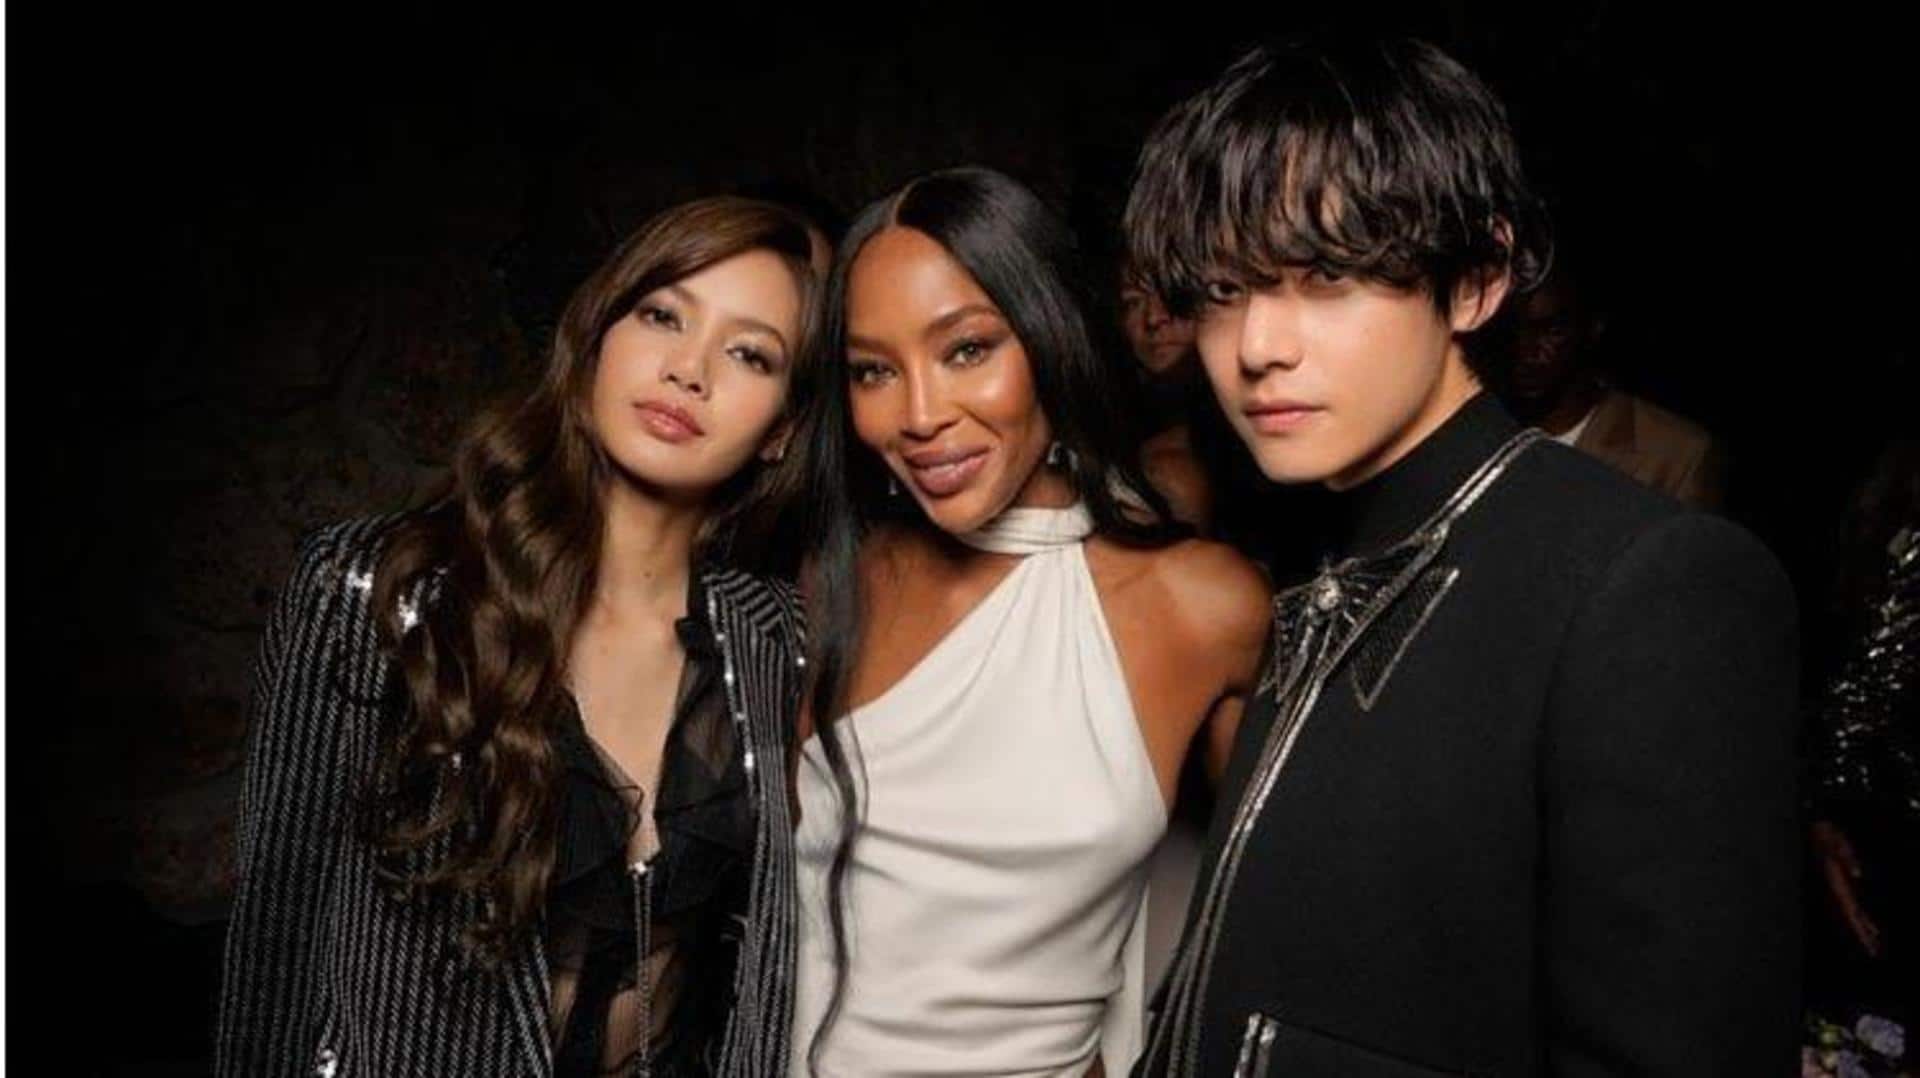 V, Lisa, Naomi Campbell's captivating picture sends fans into frenzy